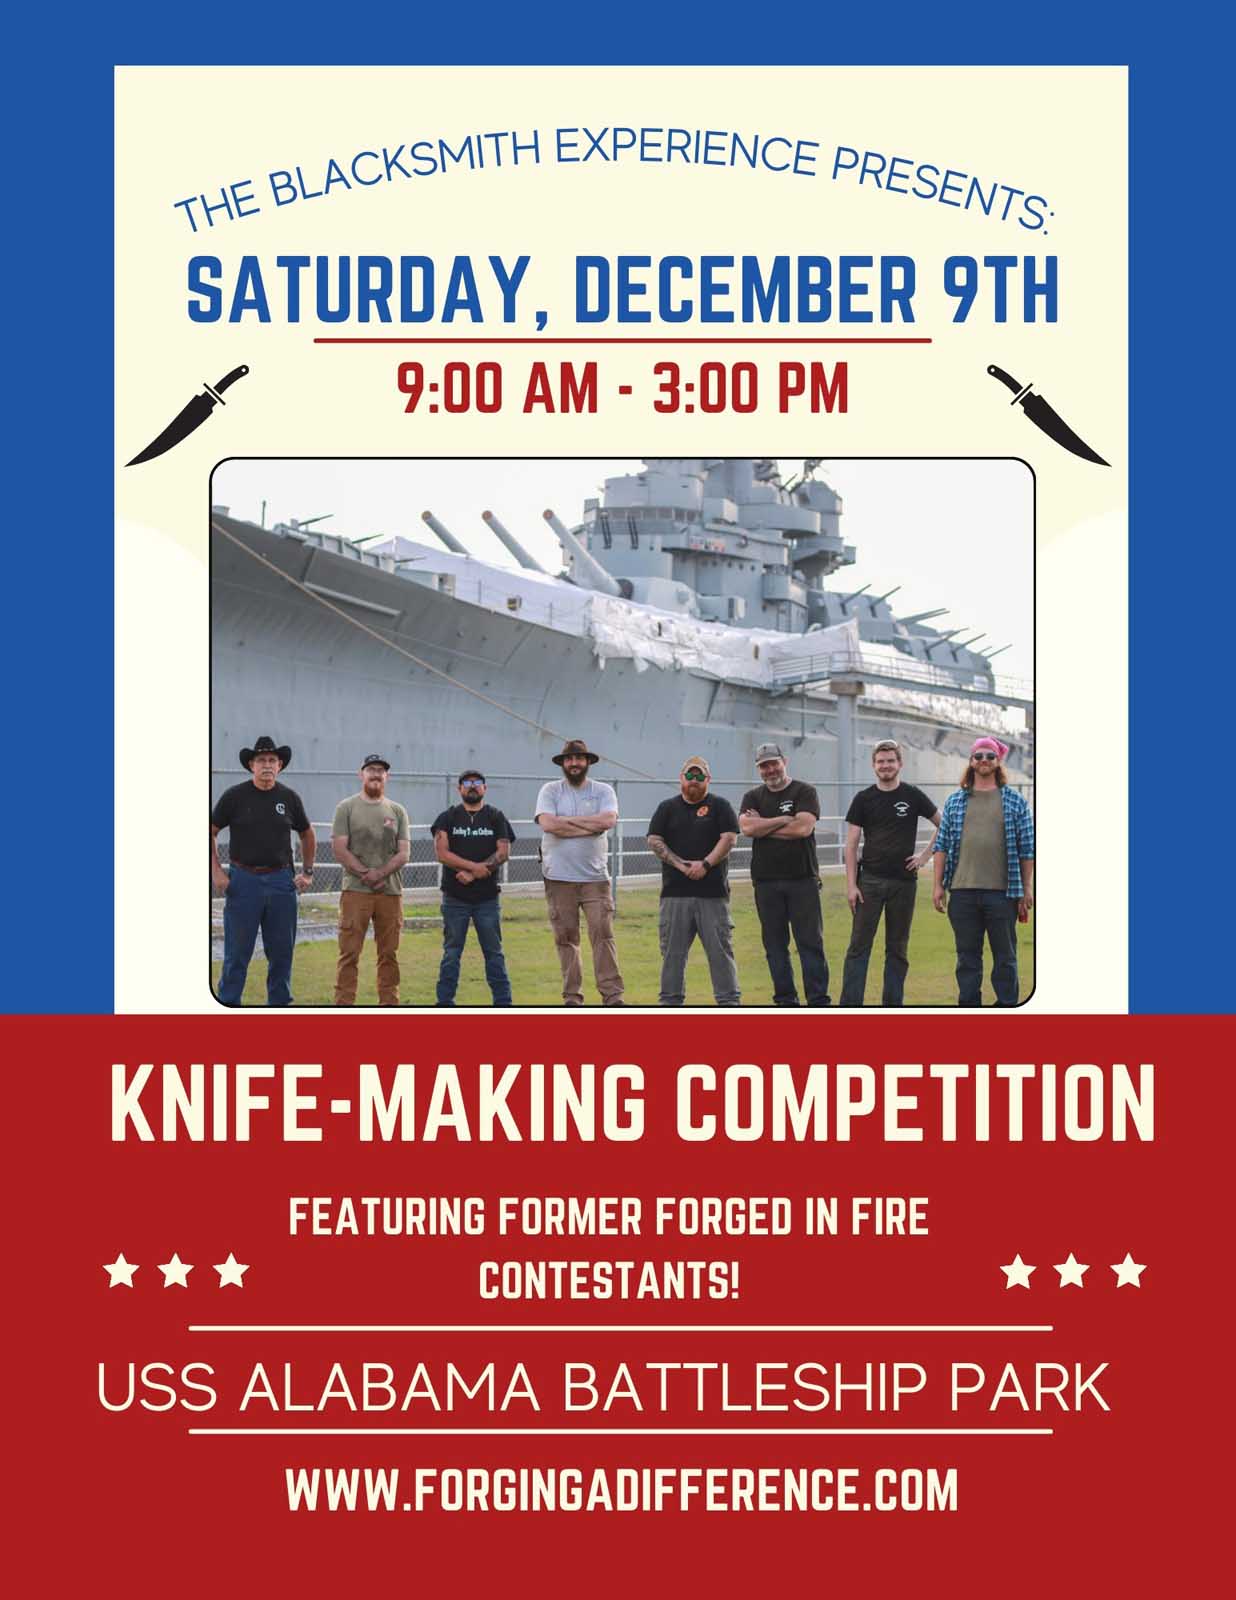 Forging A Difference Fundraiser Coming To USS Alabama